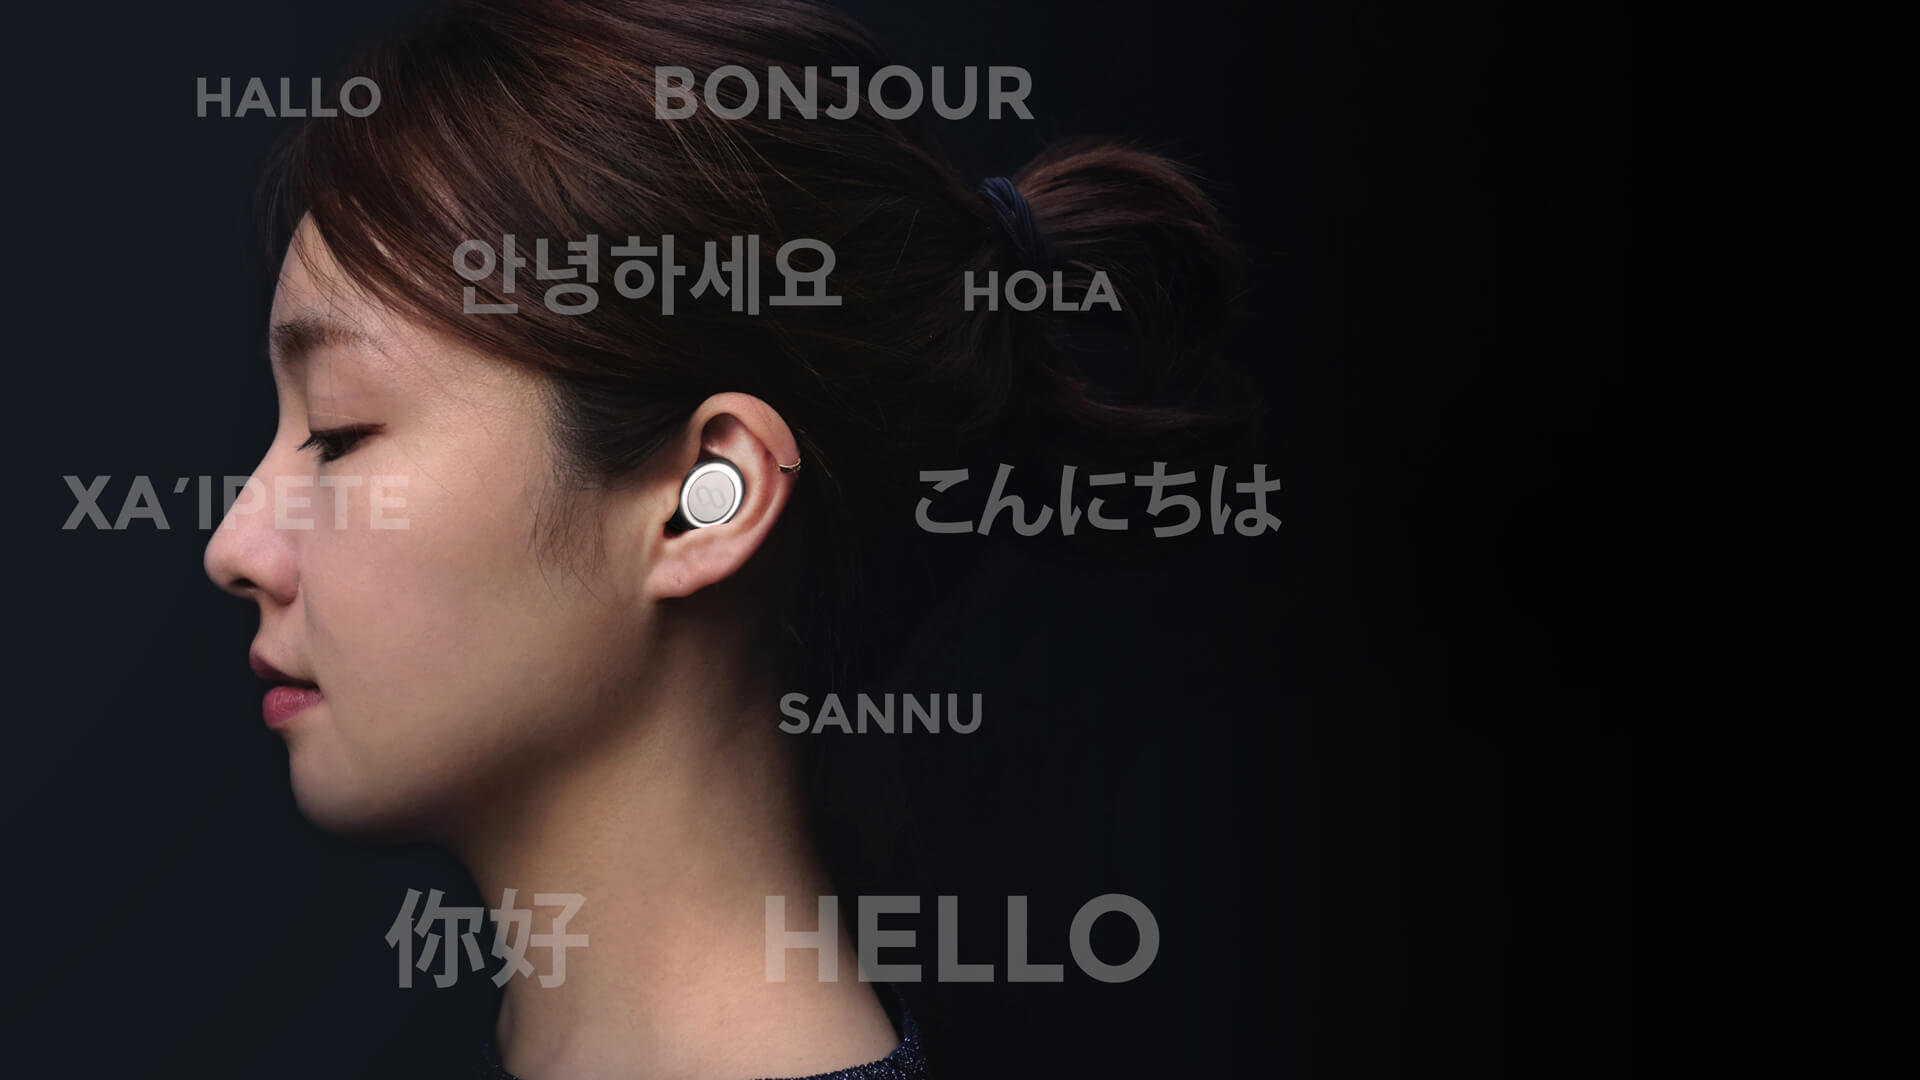 The 4 coolest earbuds that can translate you should own when travelling abroad